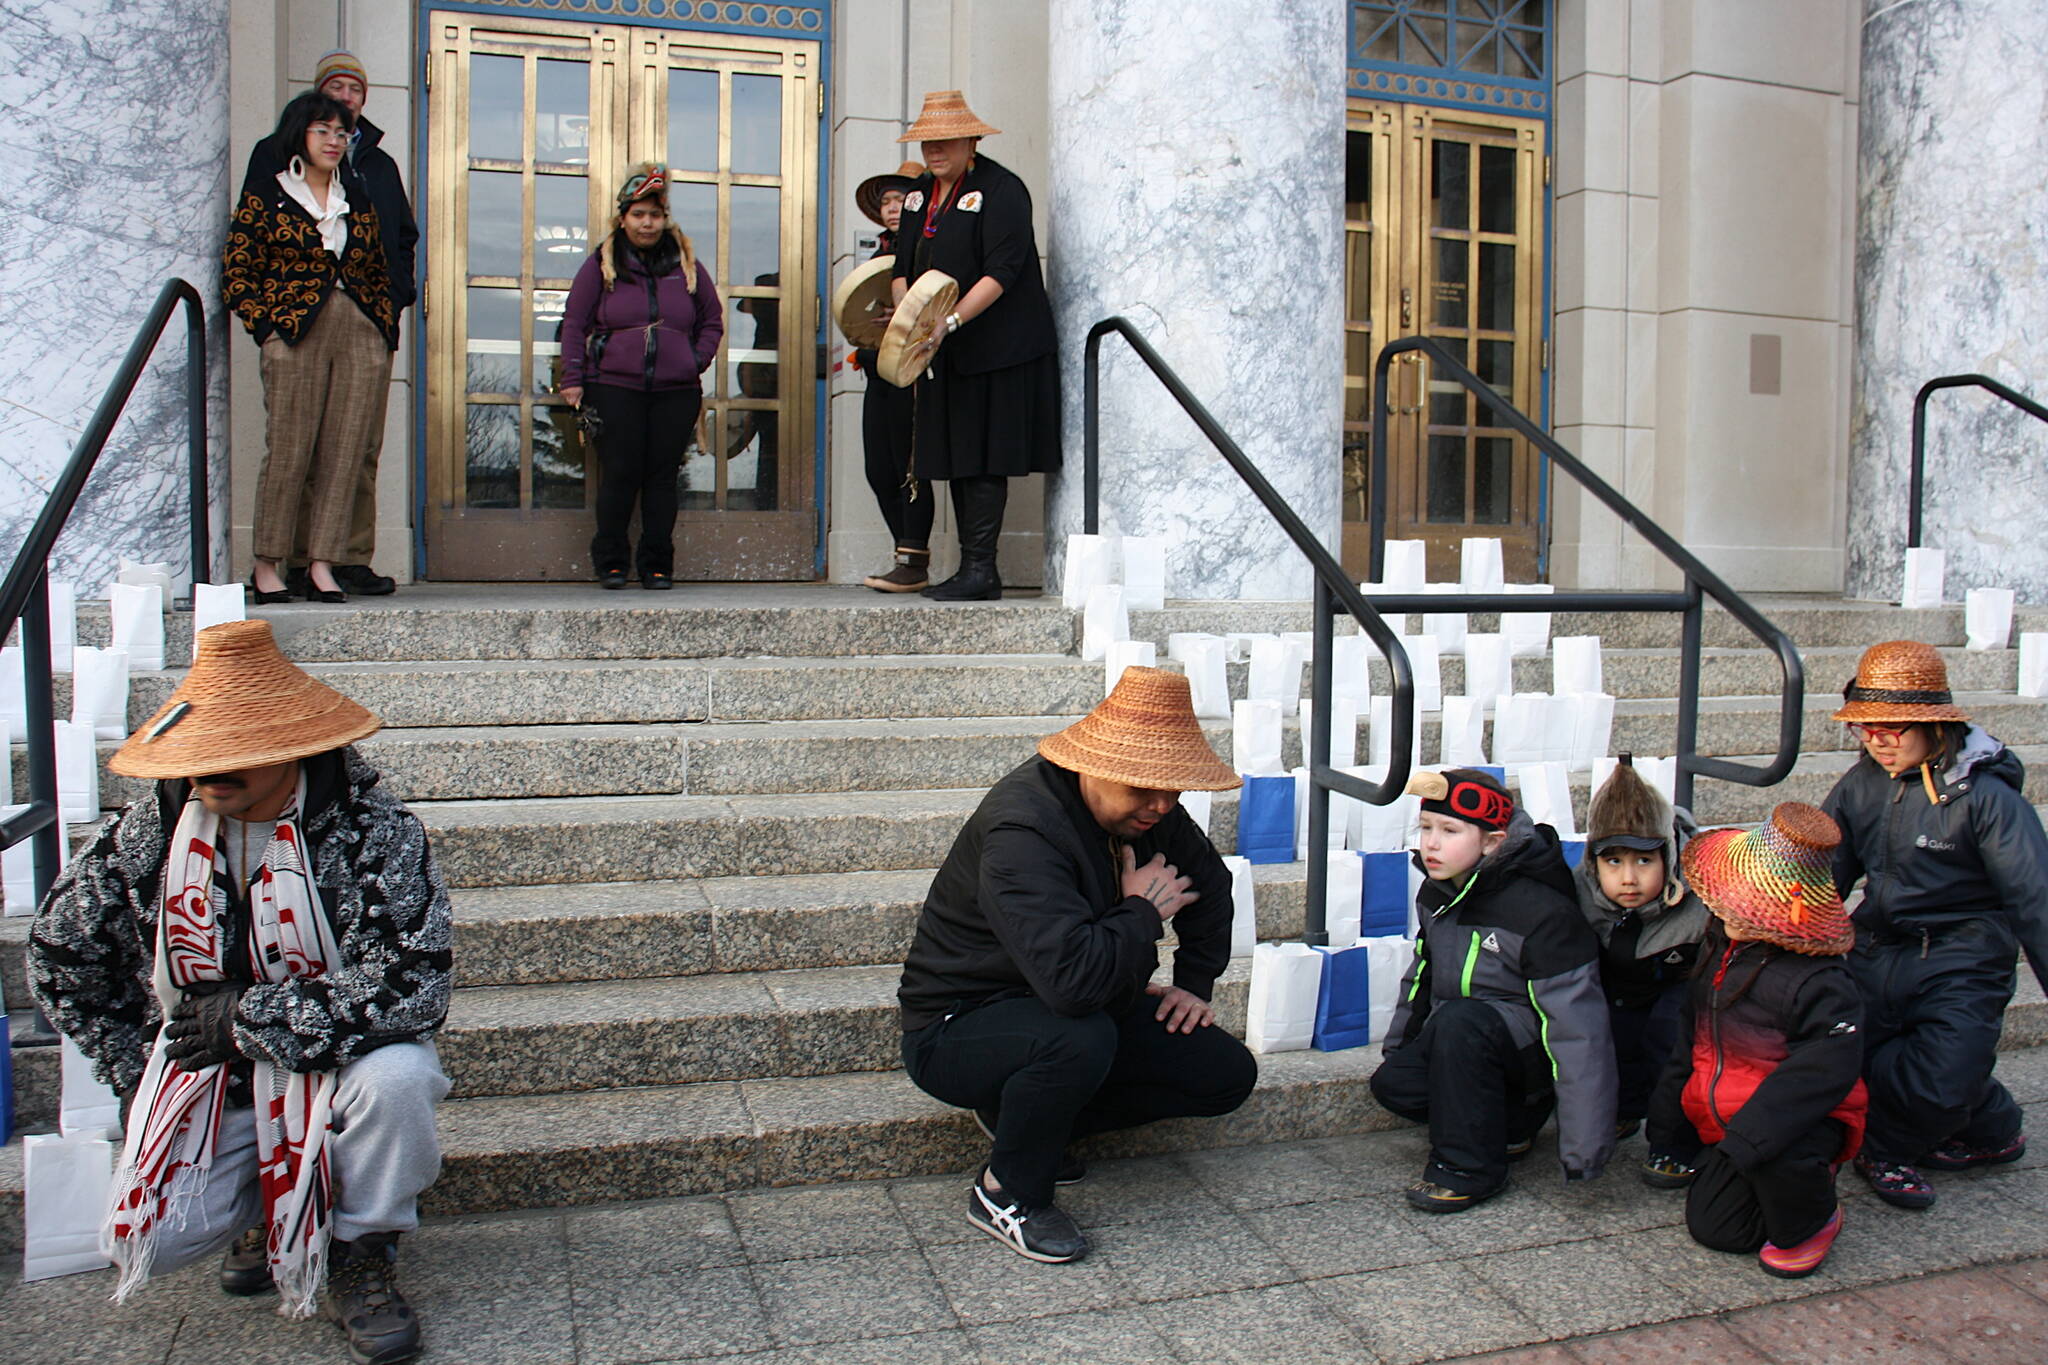 The Woosh.ji.een Dance Group performs amongst 220 candles in paper bags on the steps of the Alaska State Capitol on Tuesday evening during a vigil to recognize residents who have died by suicide. The candles represent each of the 220 suicides in 2021, with the blue bags representing people who served in the military. (Mark Sabbatini / Juneau Empire)